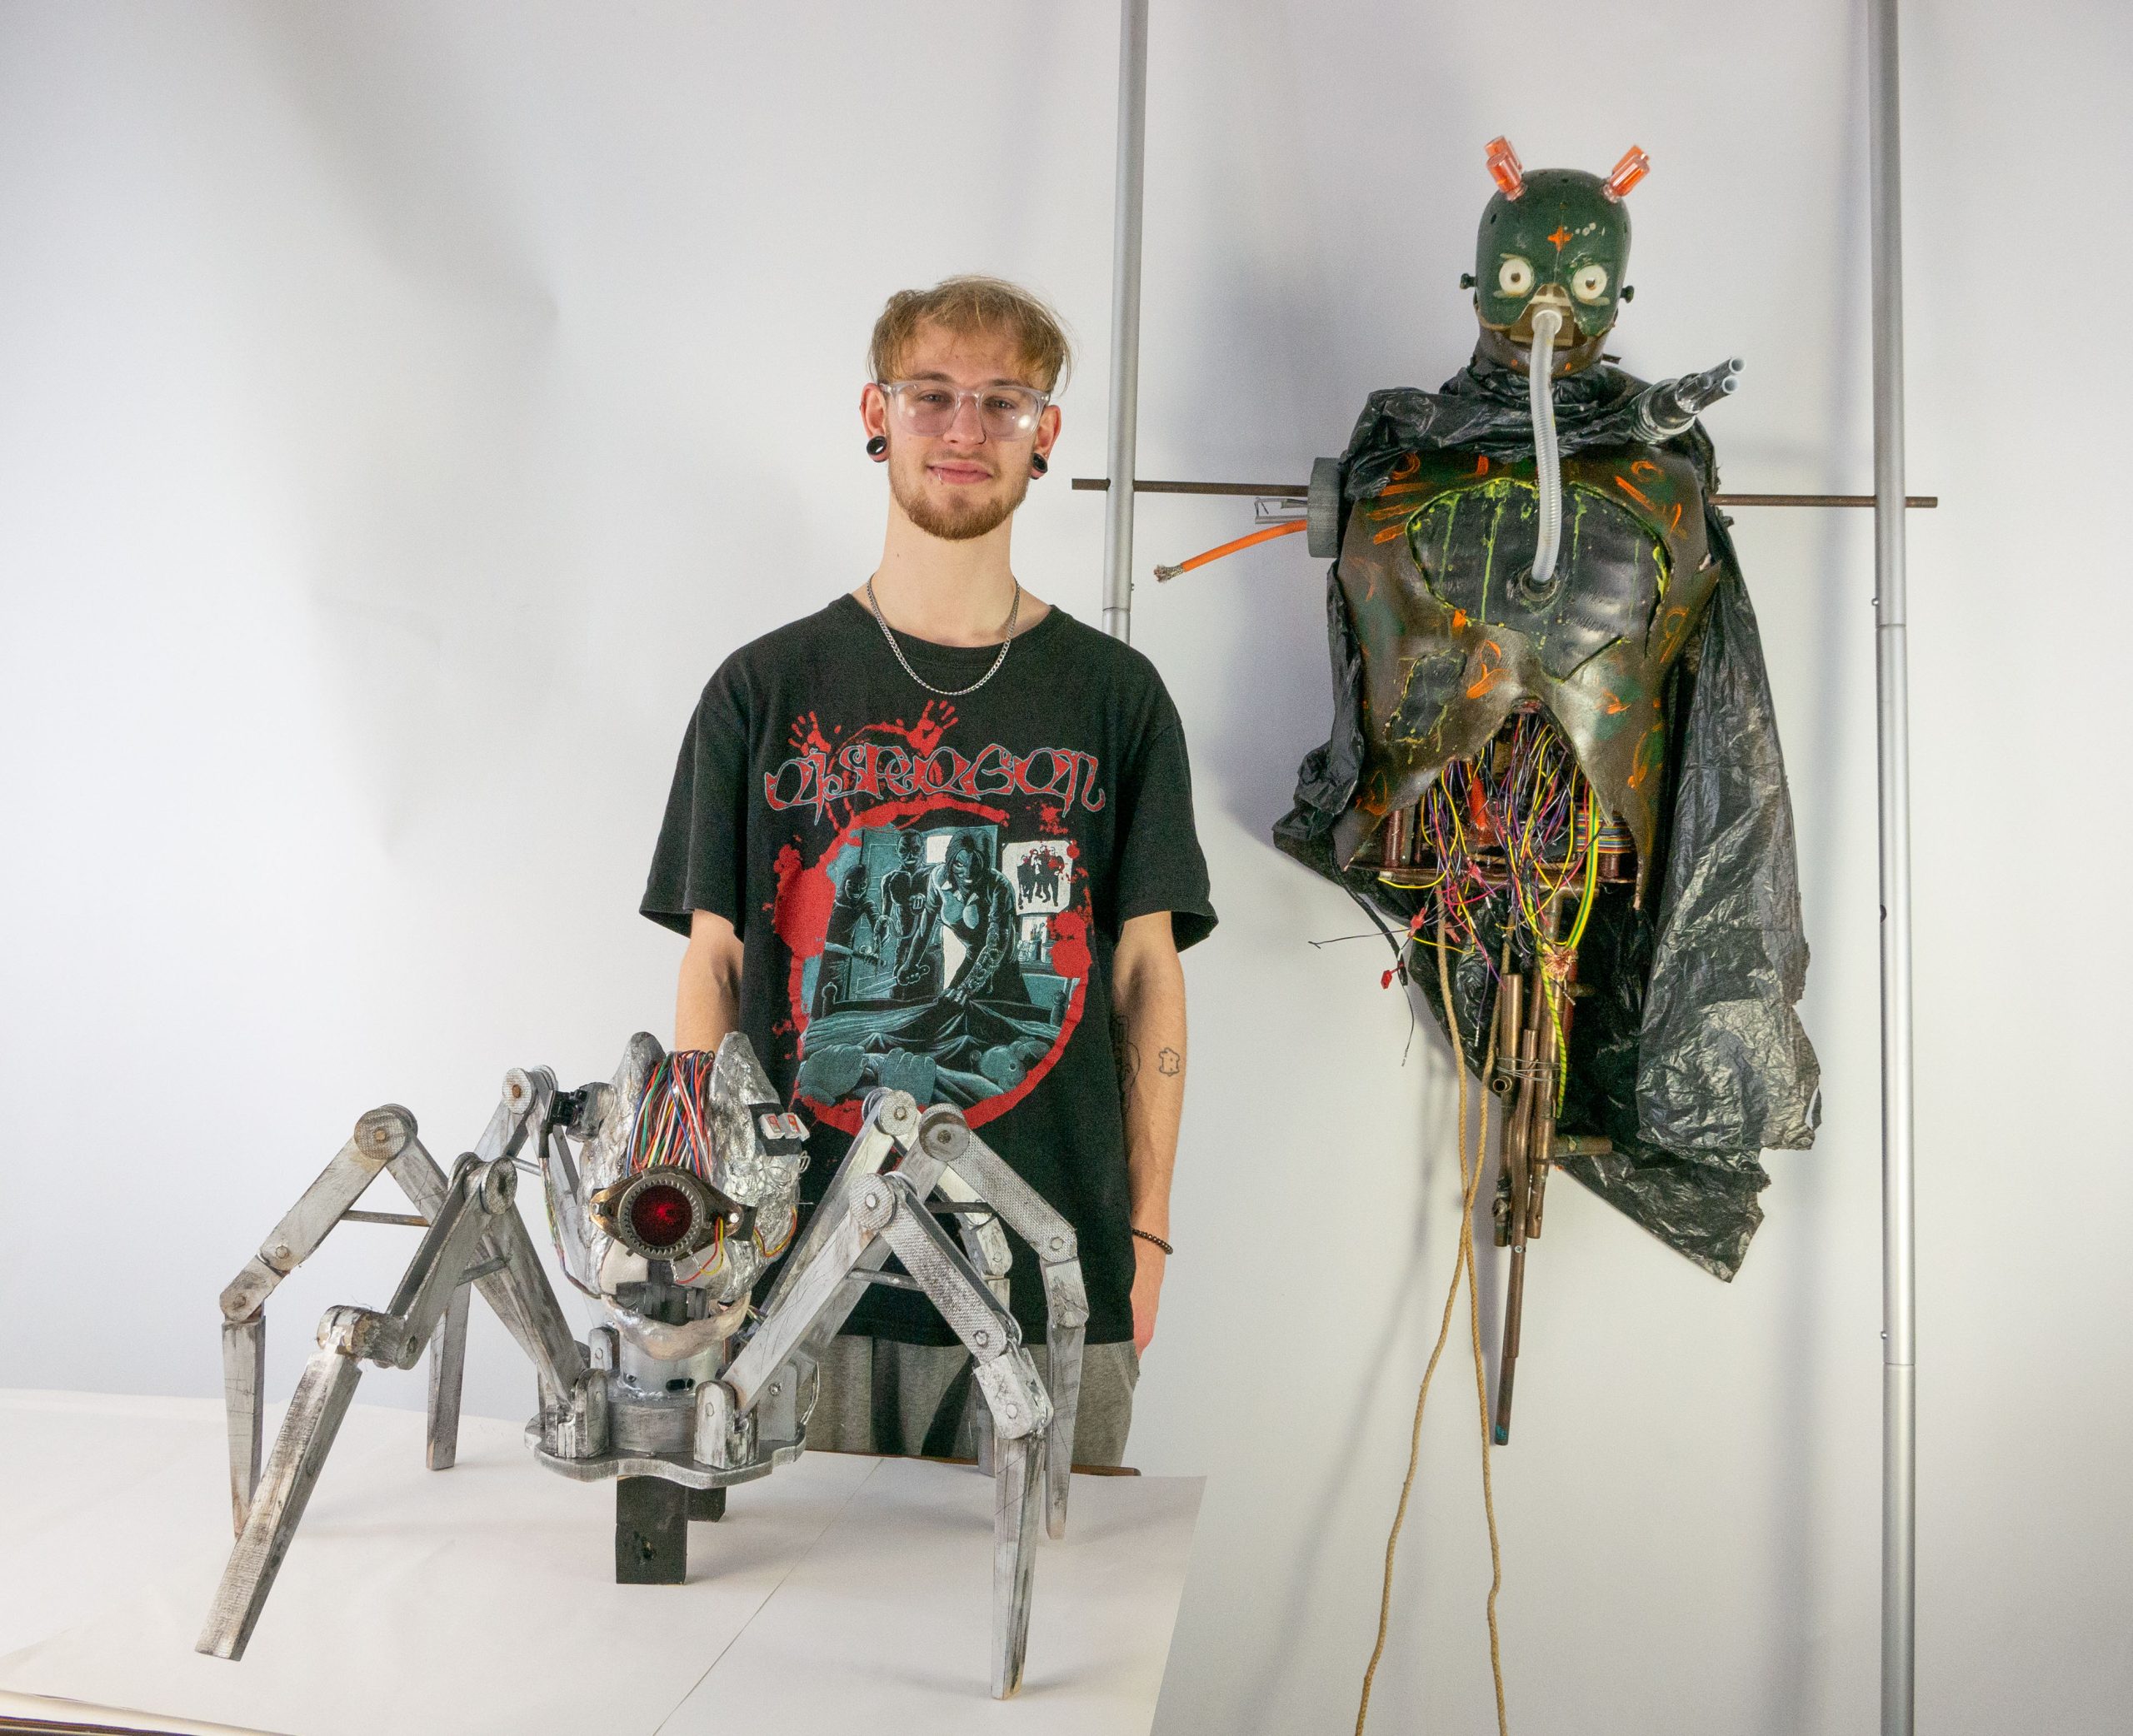 Art student Osian Morris stands alsongside his work, a giant metalic spider and a disembodied robot.